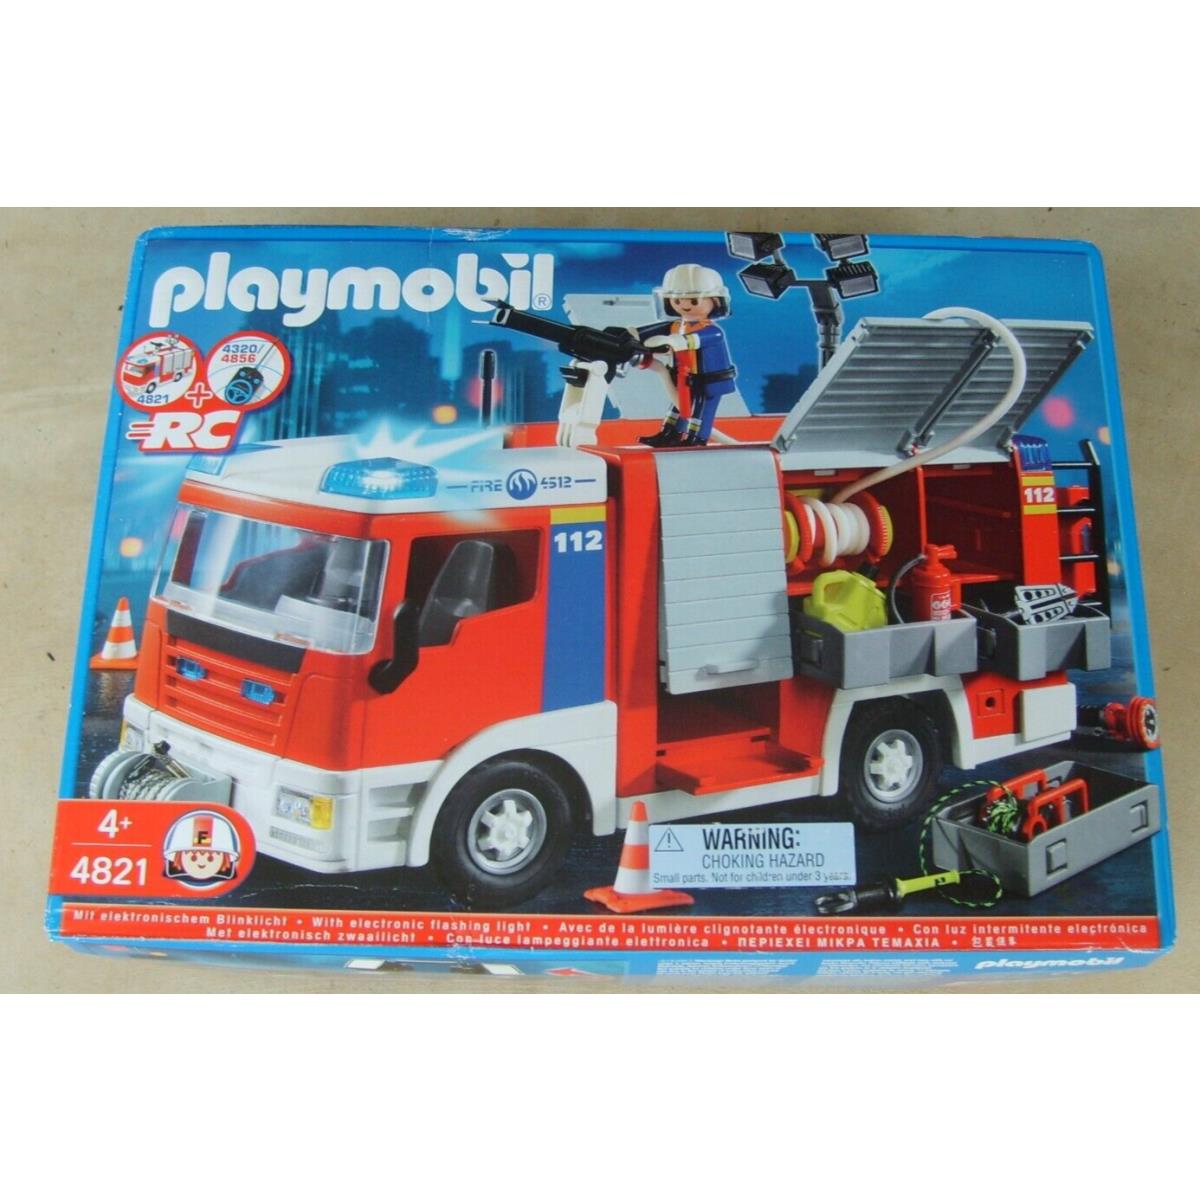 Playmobil City Action Remote Control Lights Fire Engine Truck Fireman 4821